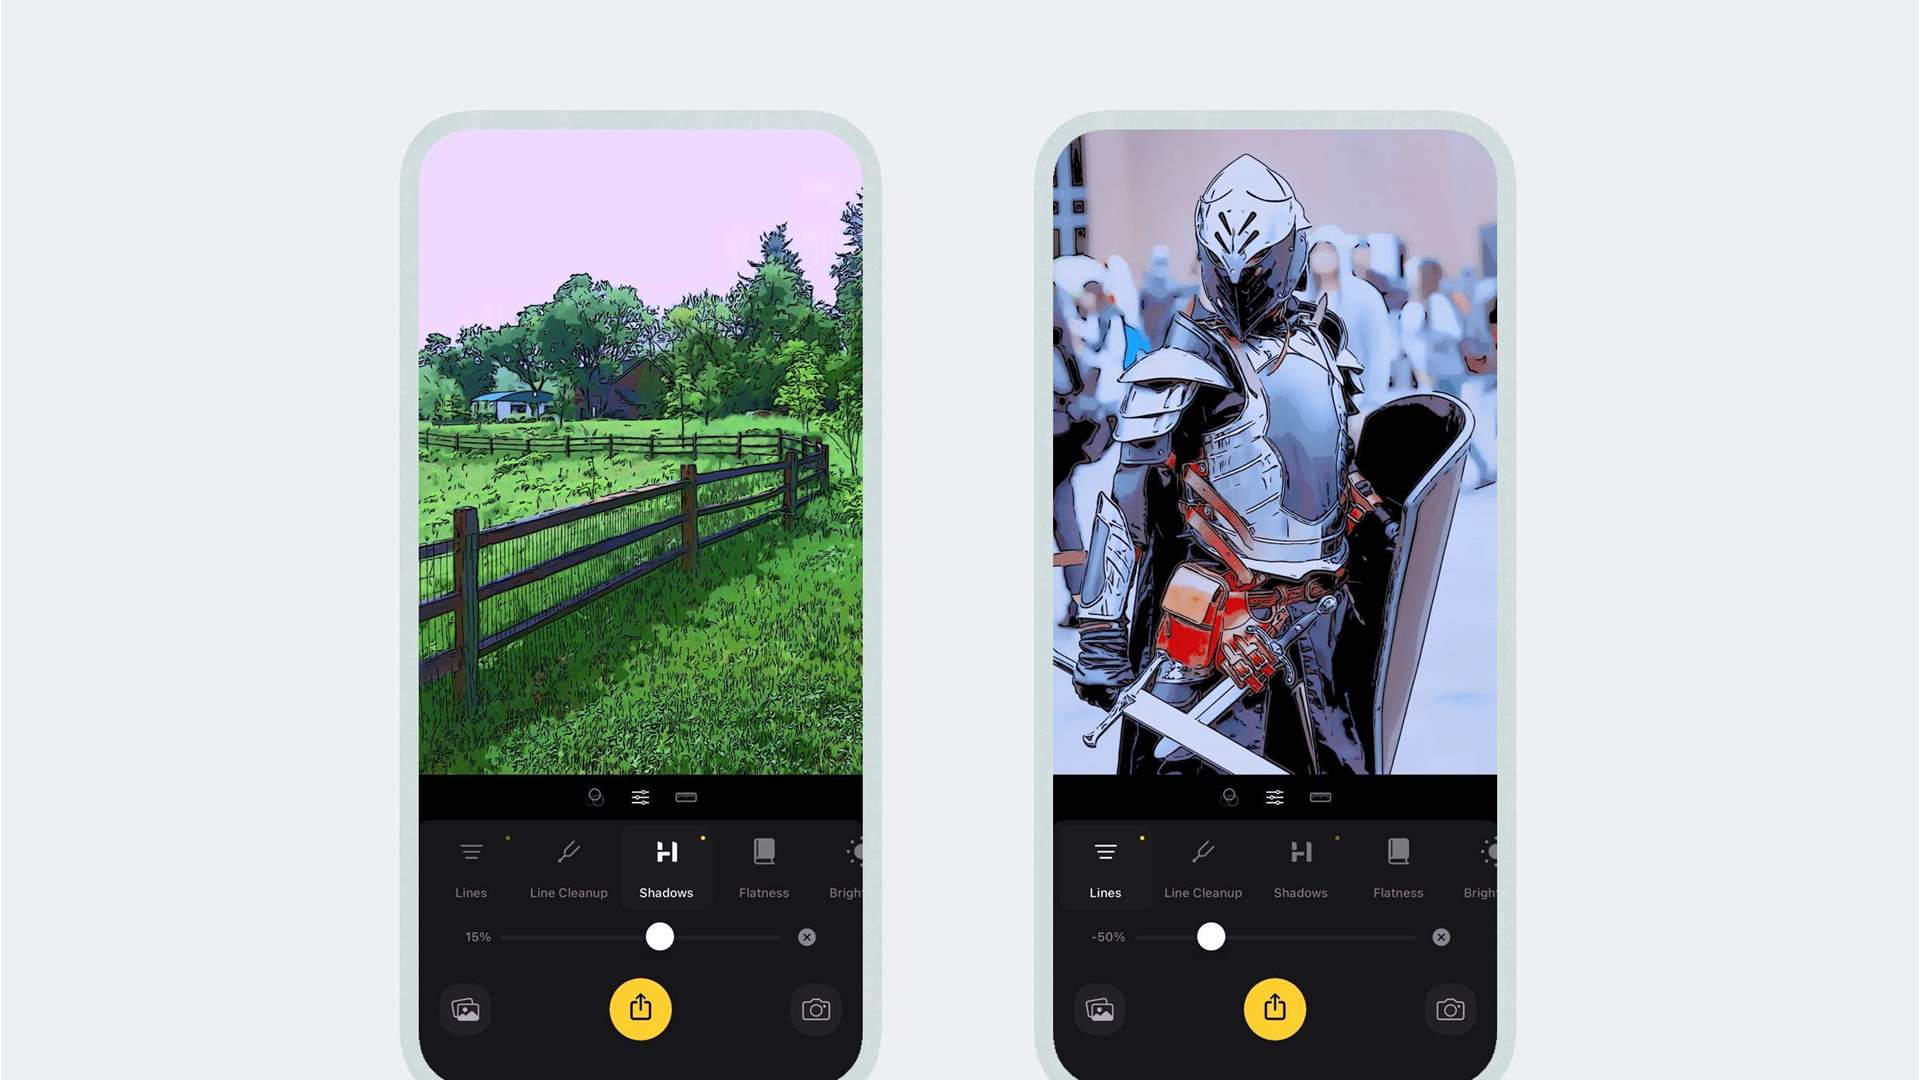 Cinemin is a fun camera app with animated film aesthetics without any AI